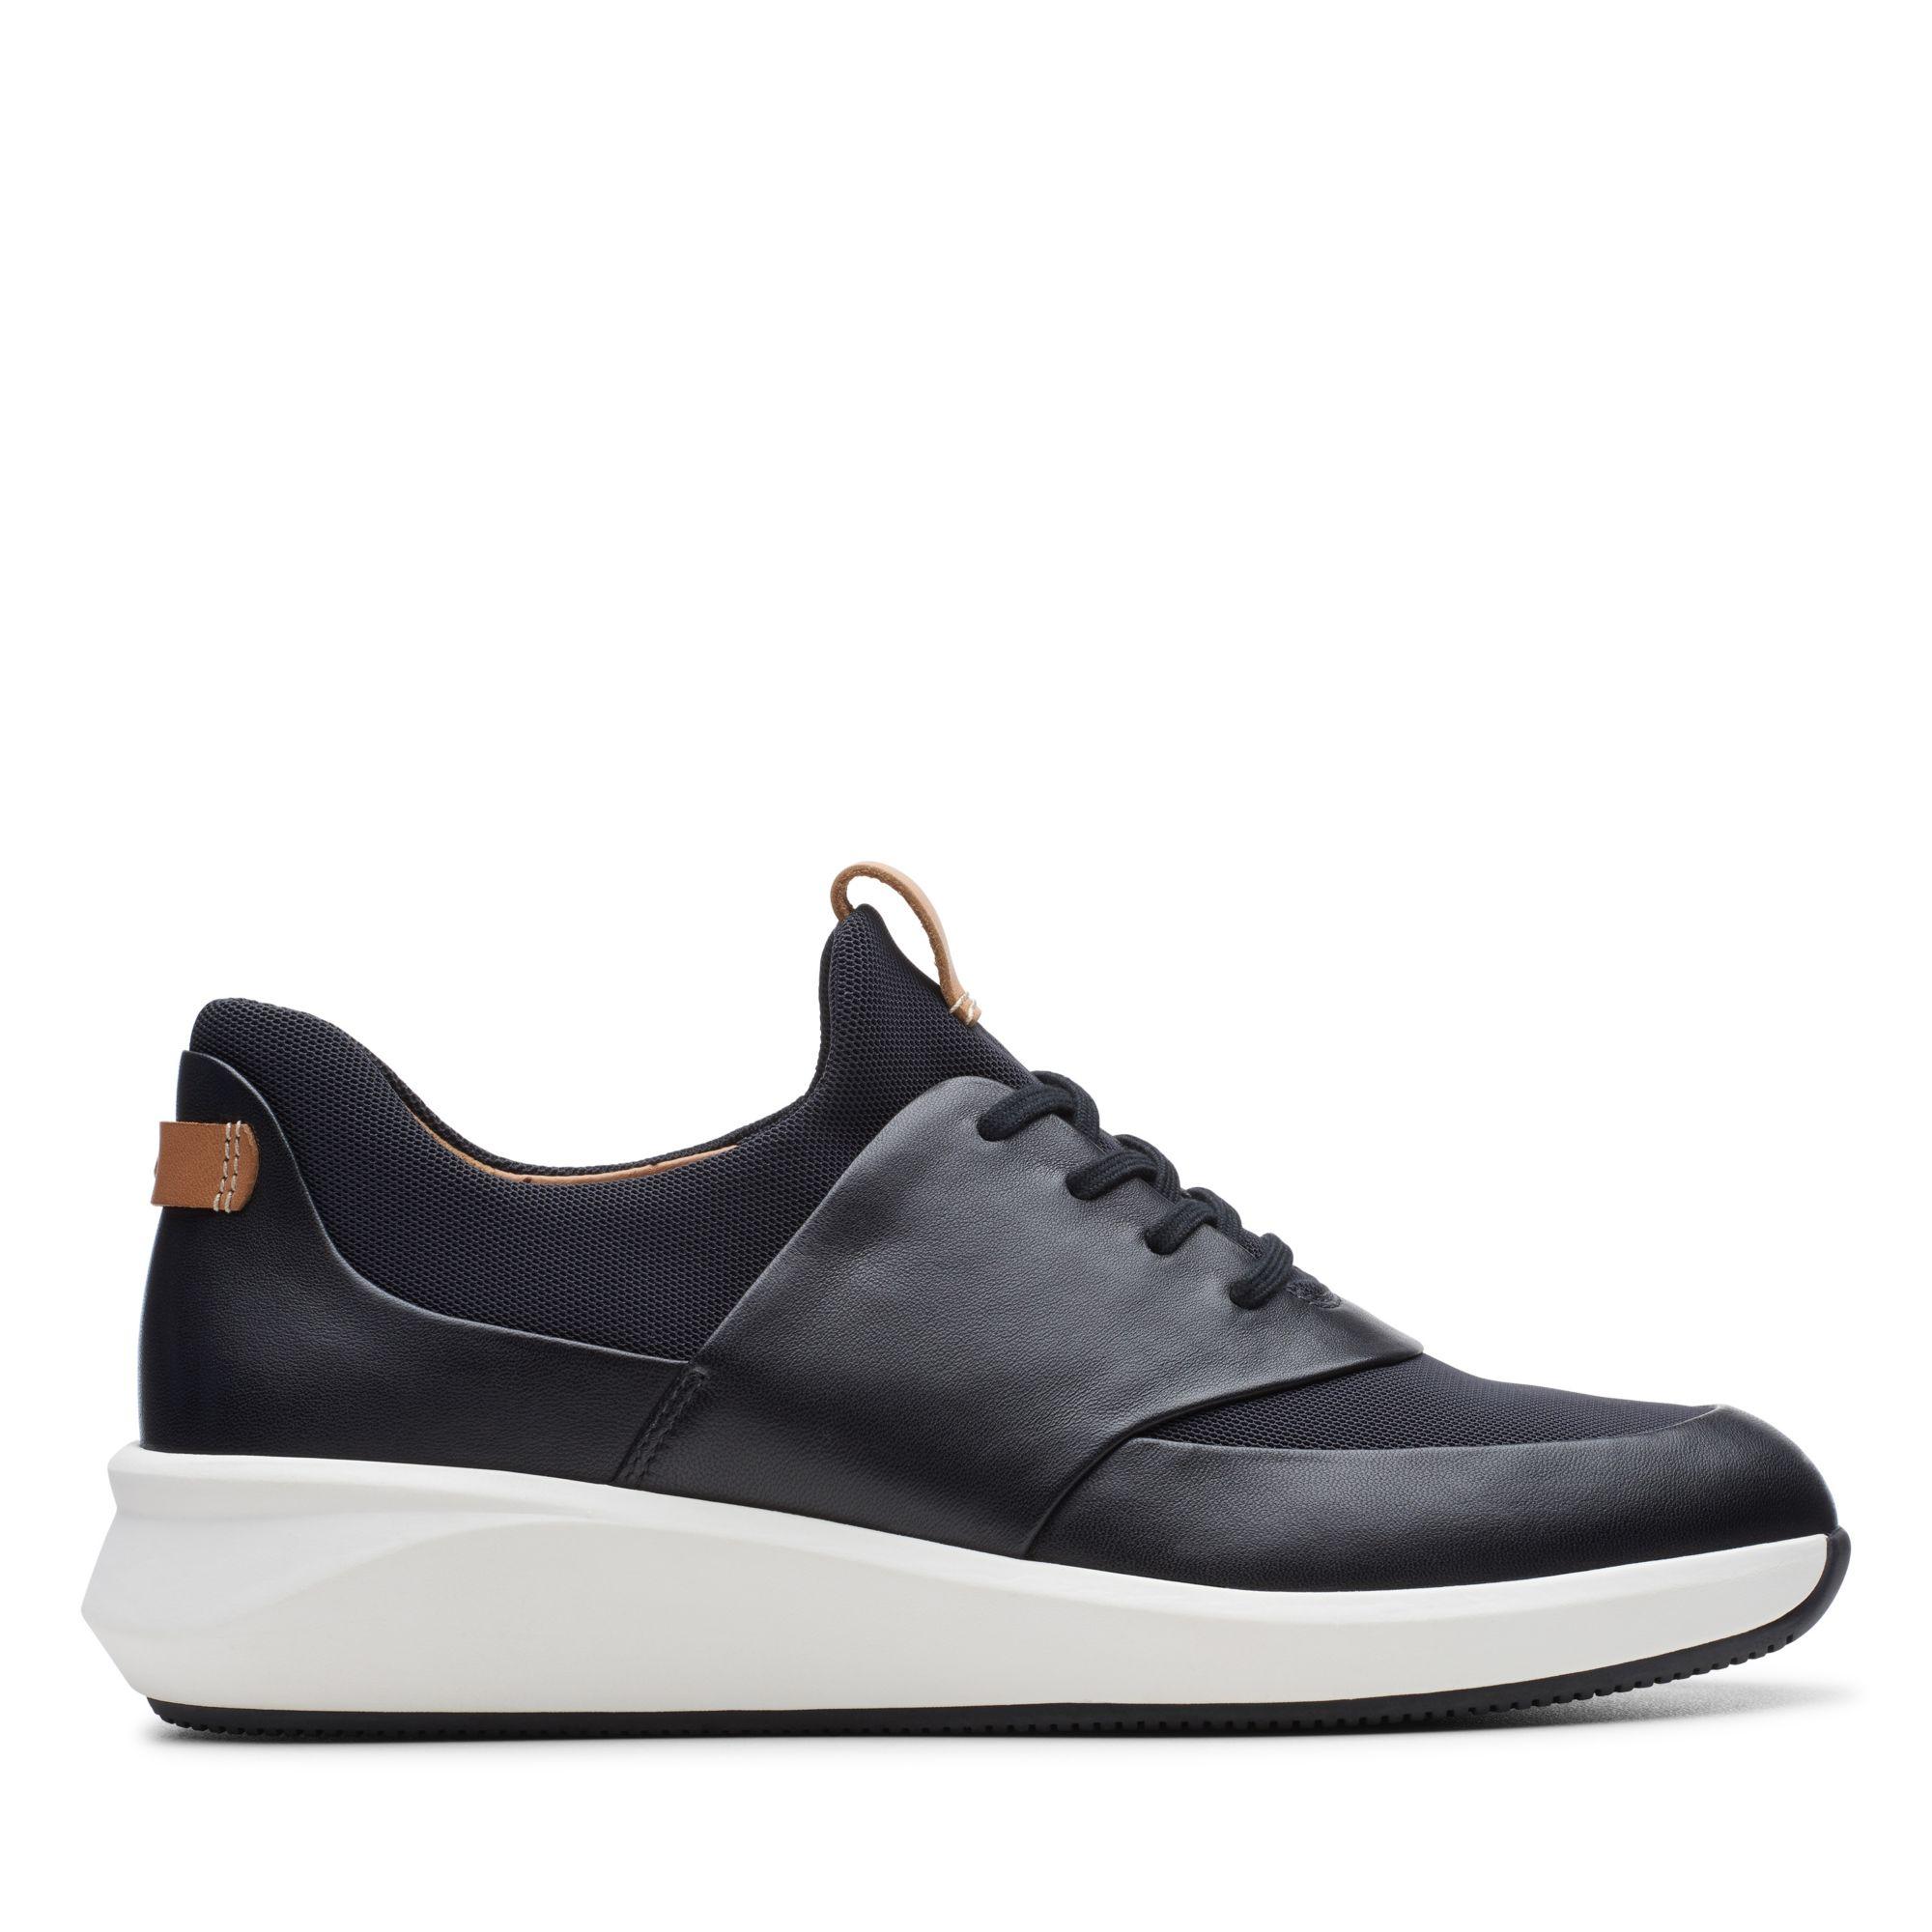 Clarks Un Rio Lace Womens Sports Trainers in Black | Lyst